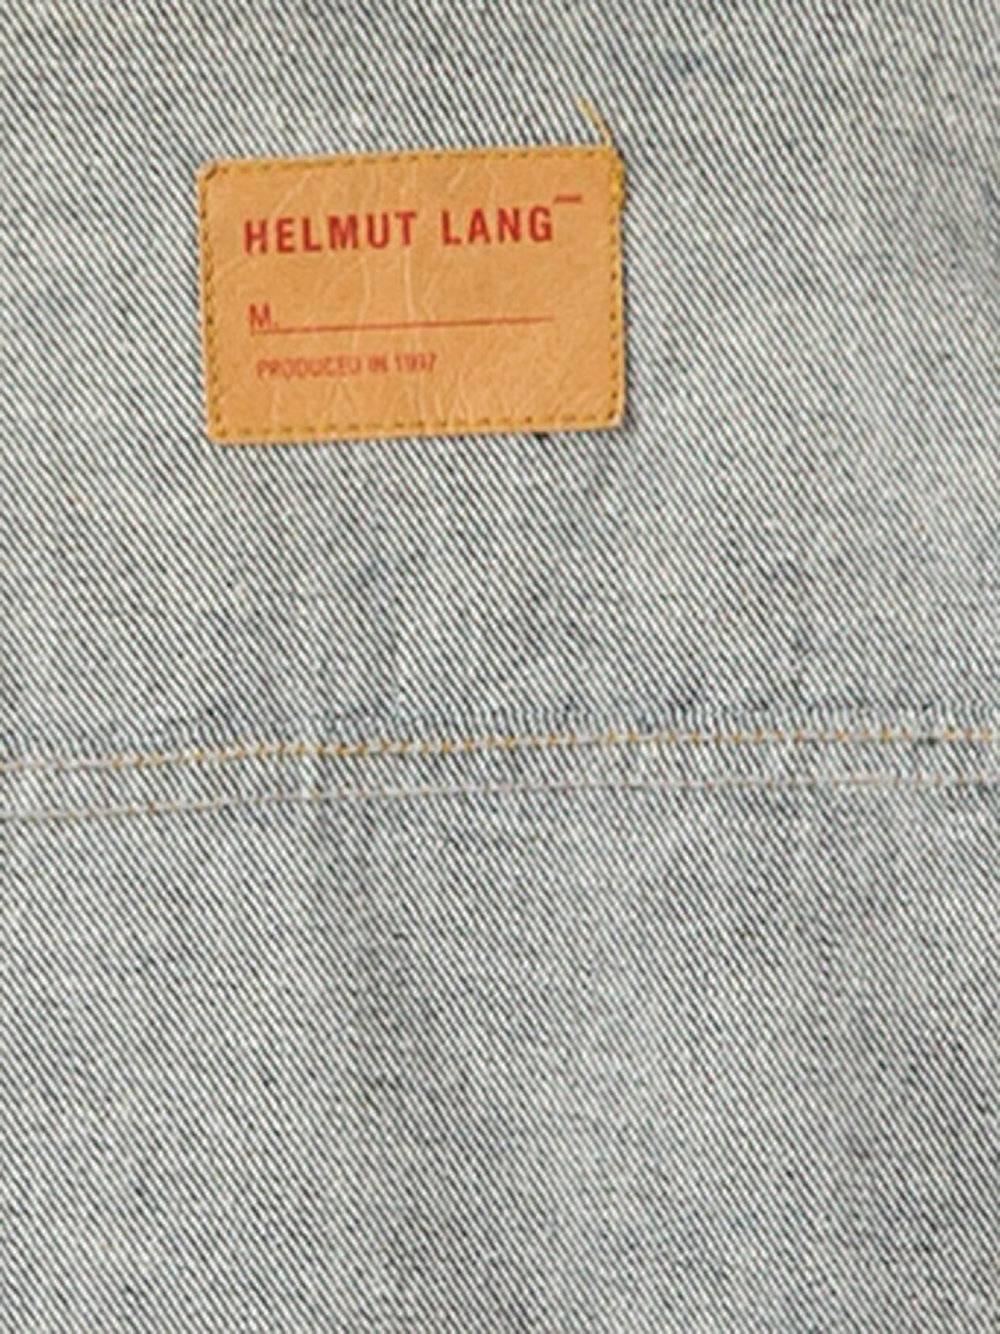 1997 Helmut Lang denim Coat large cuffs In Excellent Condition For Sale In London, GB